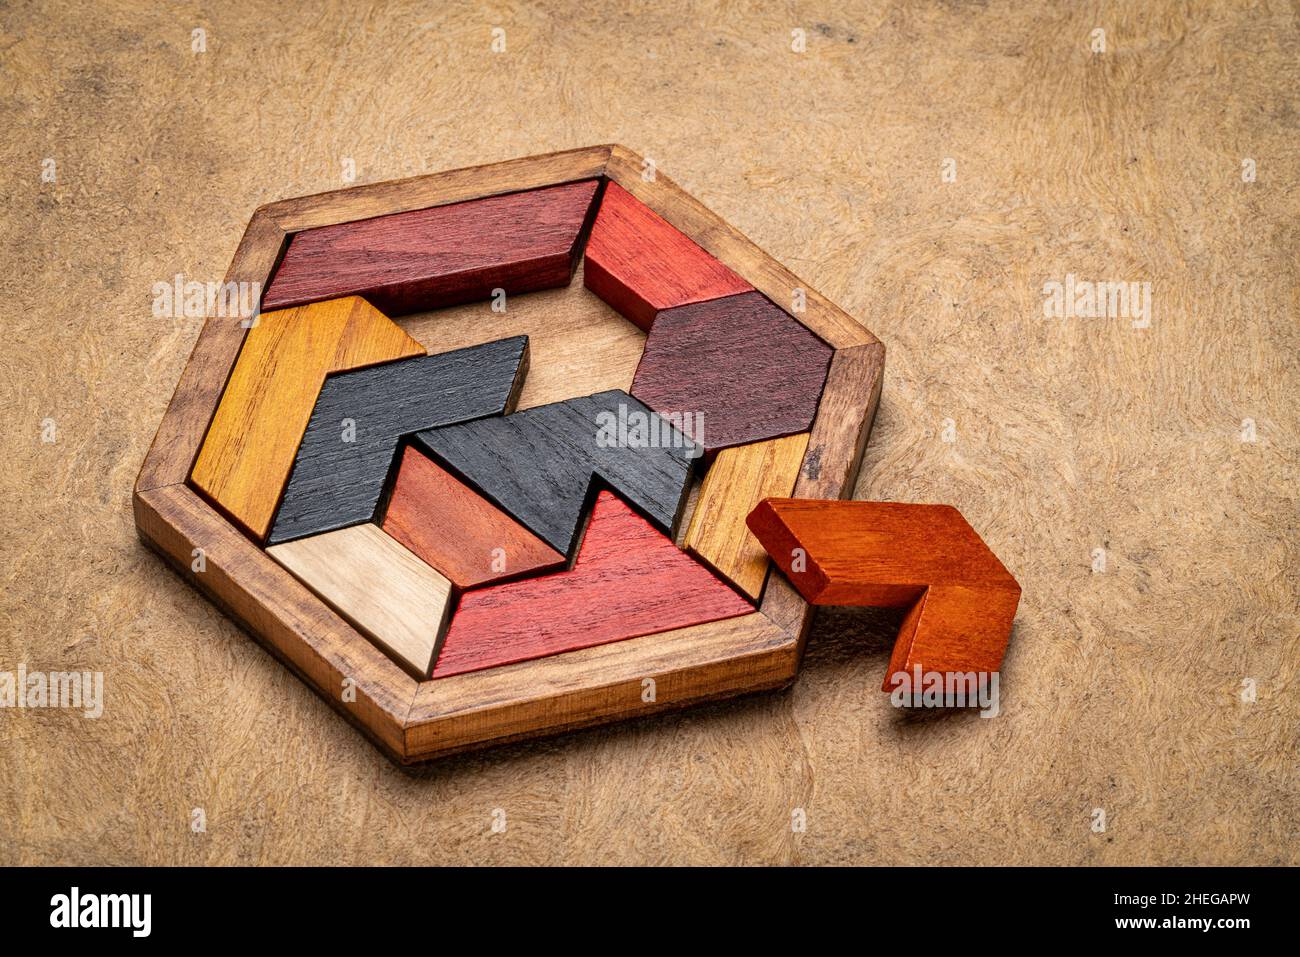 wooden hexagon tangram puzzle against textured handmade bark paper, brain teaser and fun game with multiple ways to solve Stock Photo